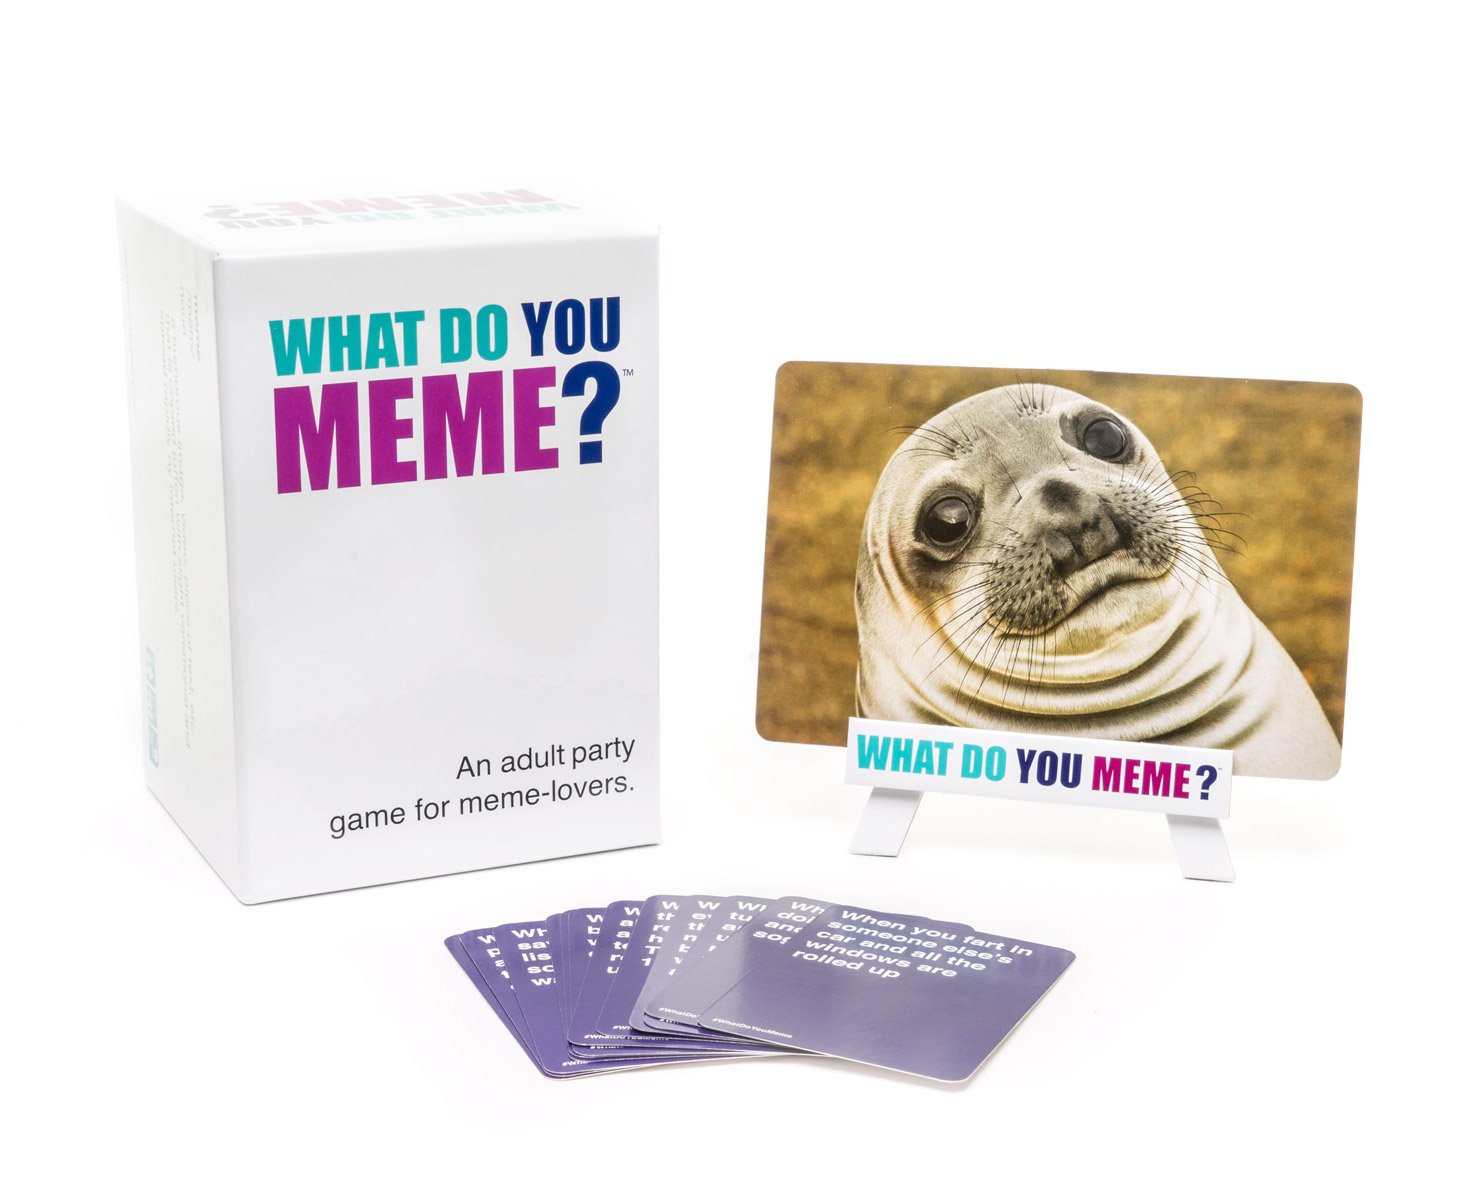 What Do You Meme game fun for bedbound people recovering from surgery or illness.